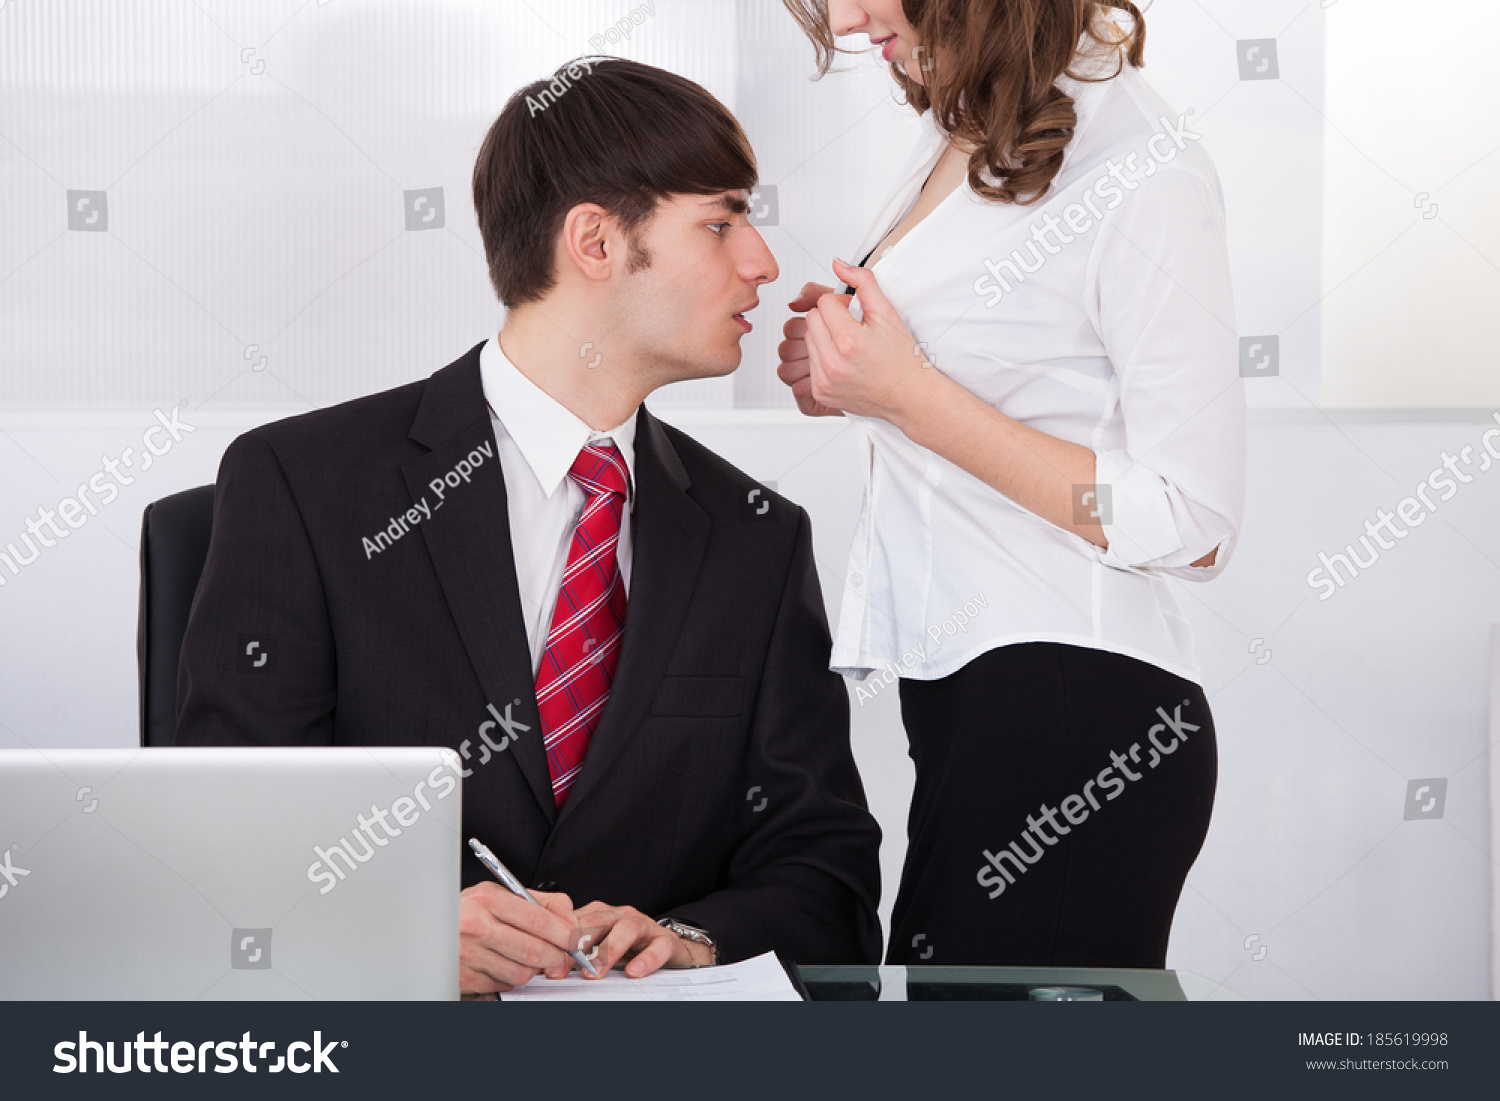 How To Seduce Your Boss